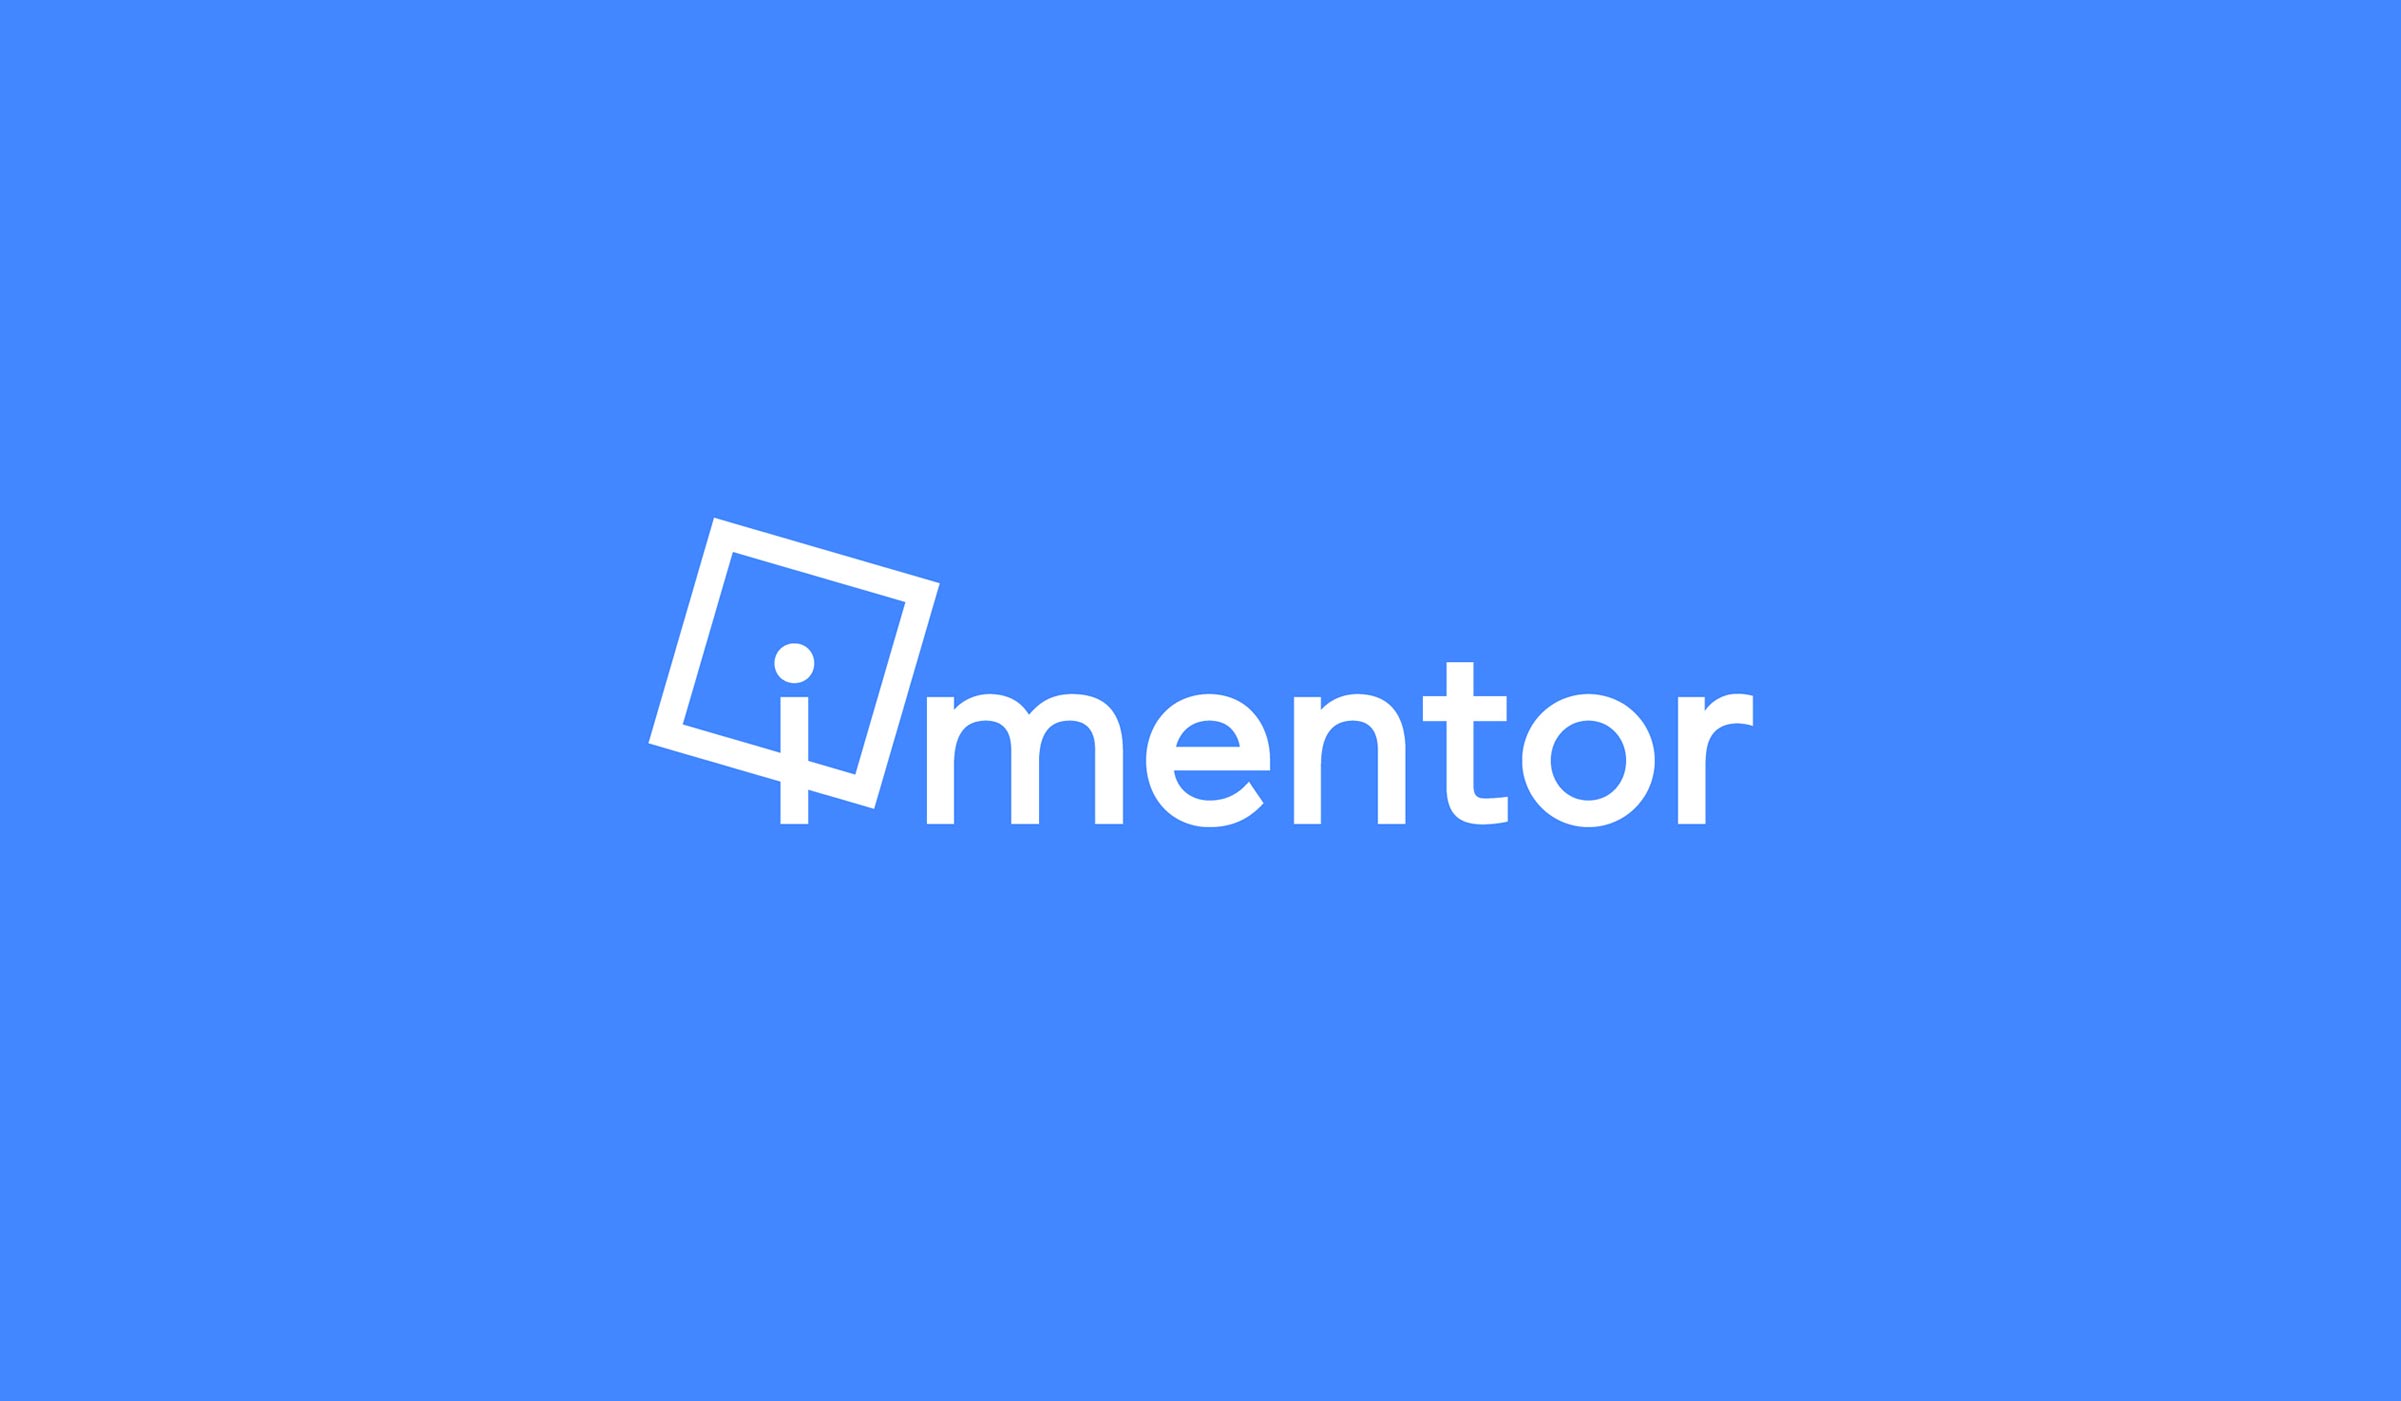 Top 4 Online Mentoring Platforms And How Will They Benefit You?